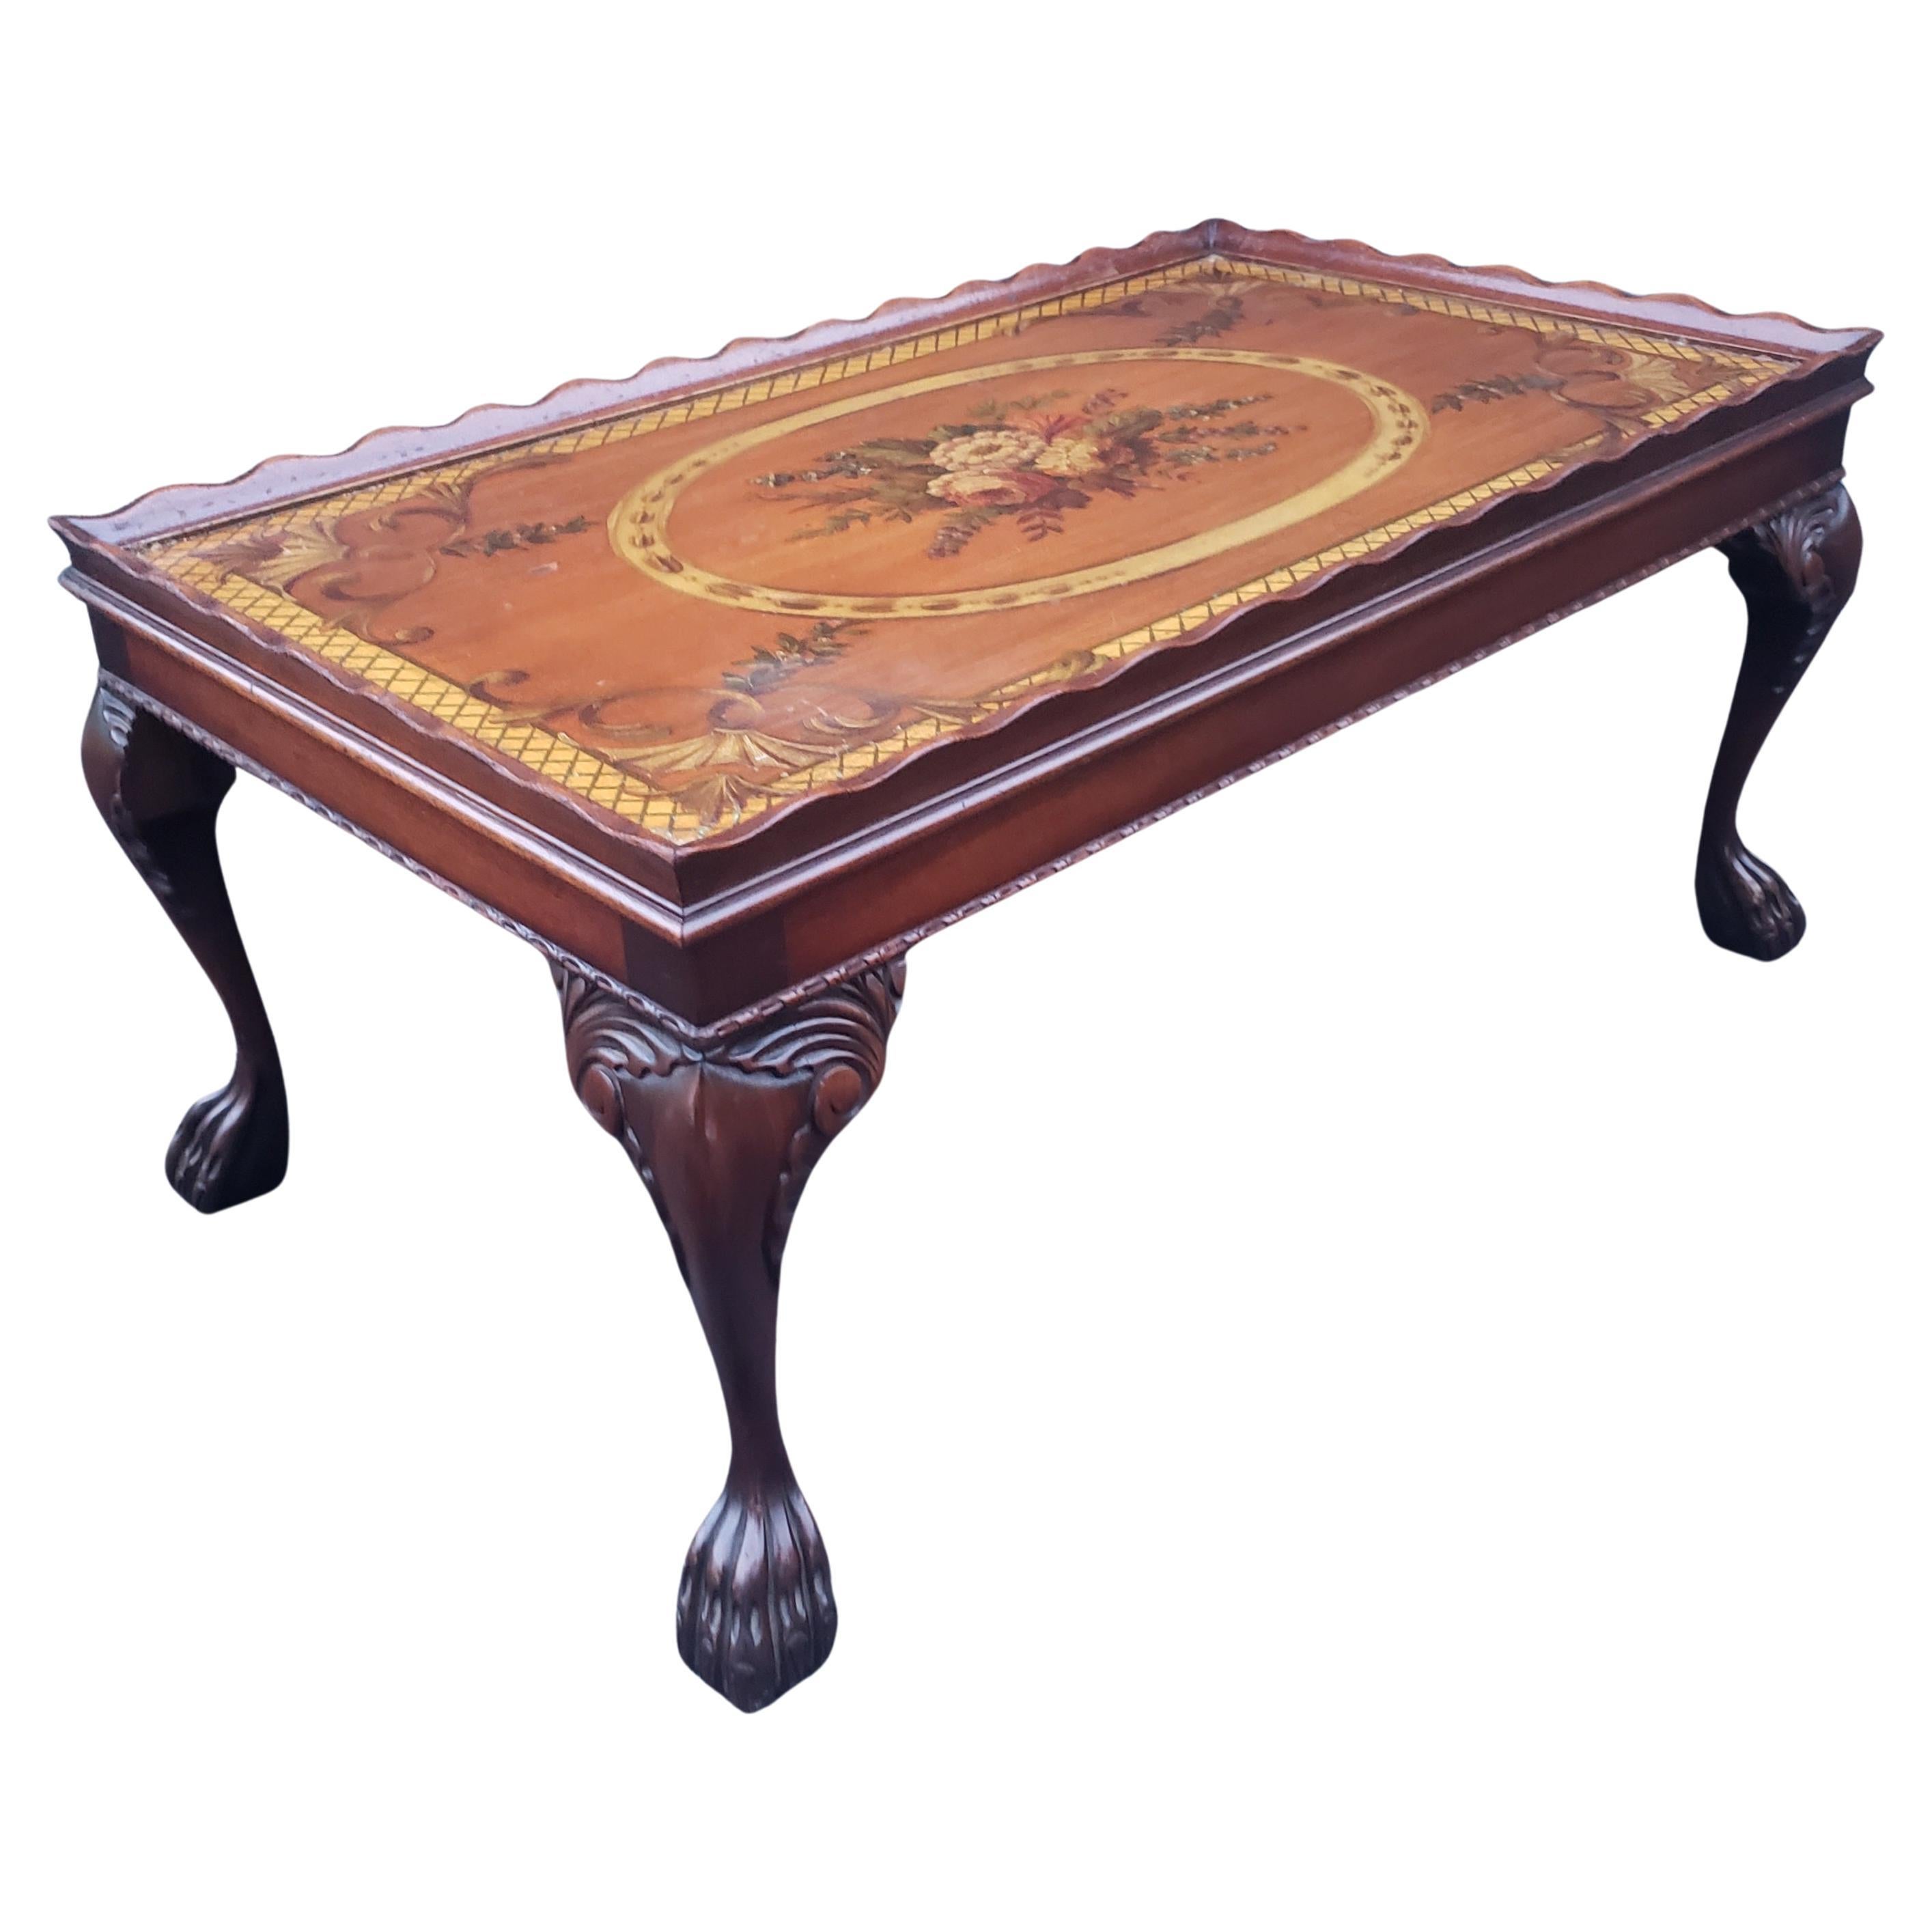 1940s Georgian Floral Hand Painted Top Mahogany Coffee Table W/ Protective Glass